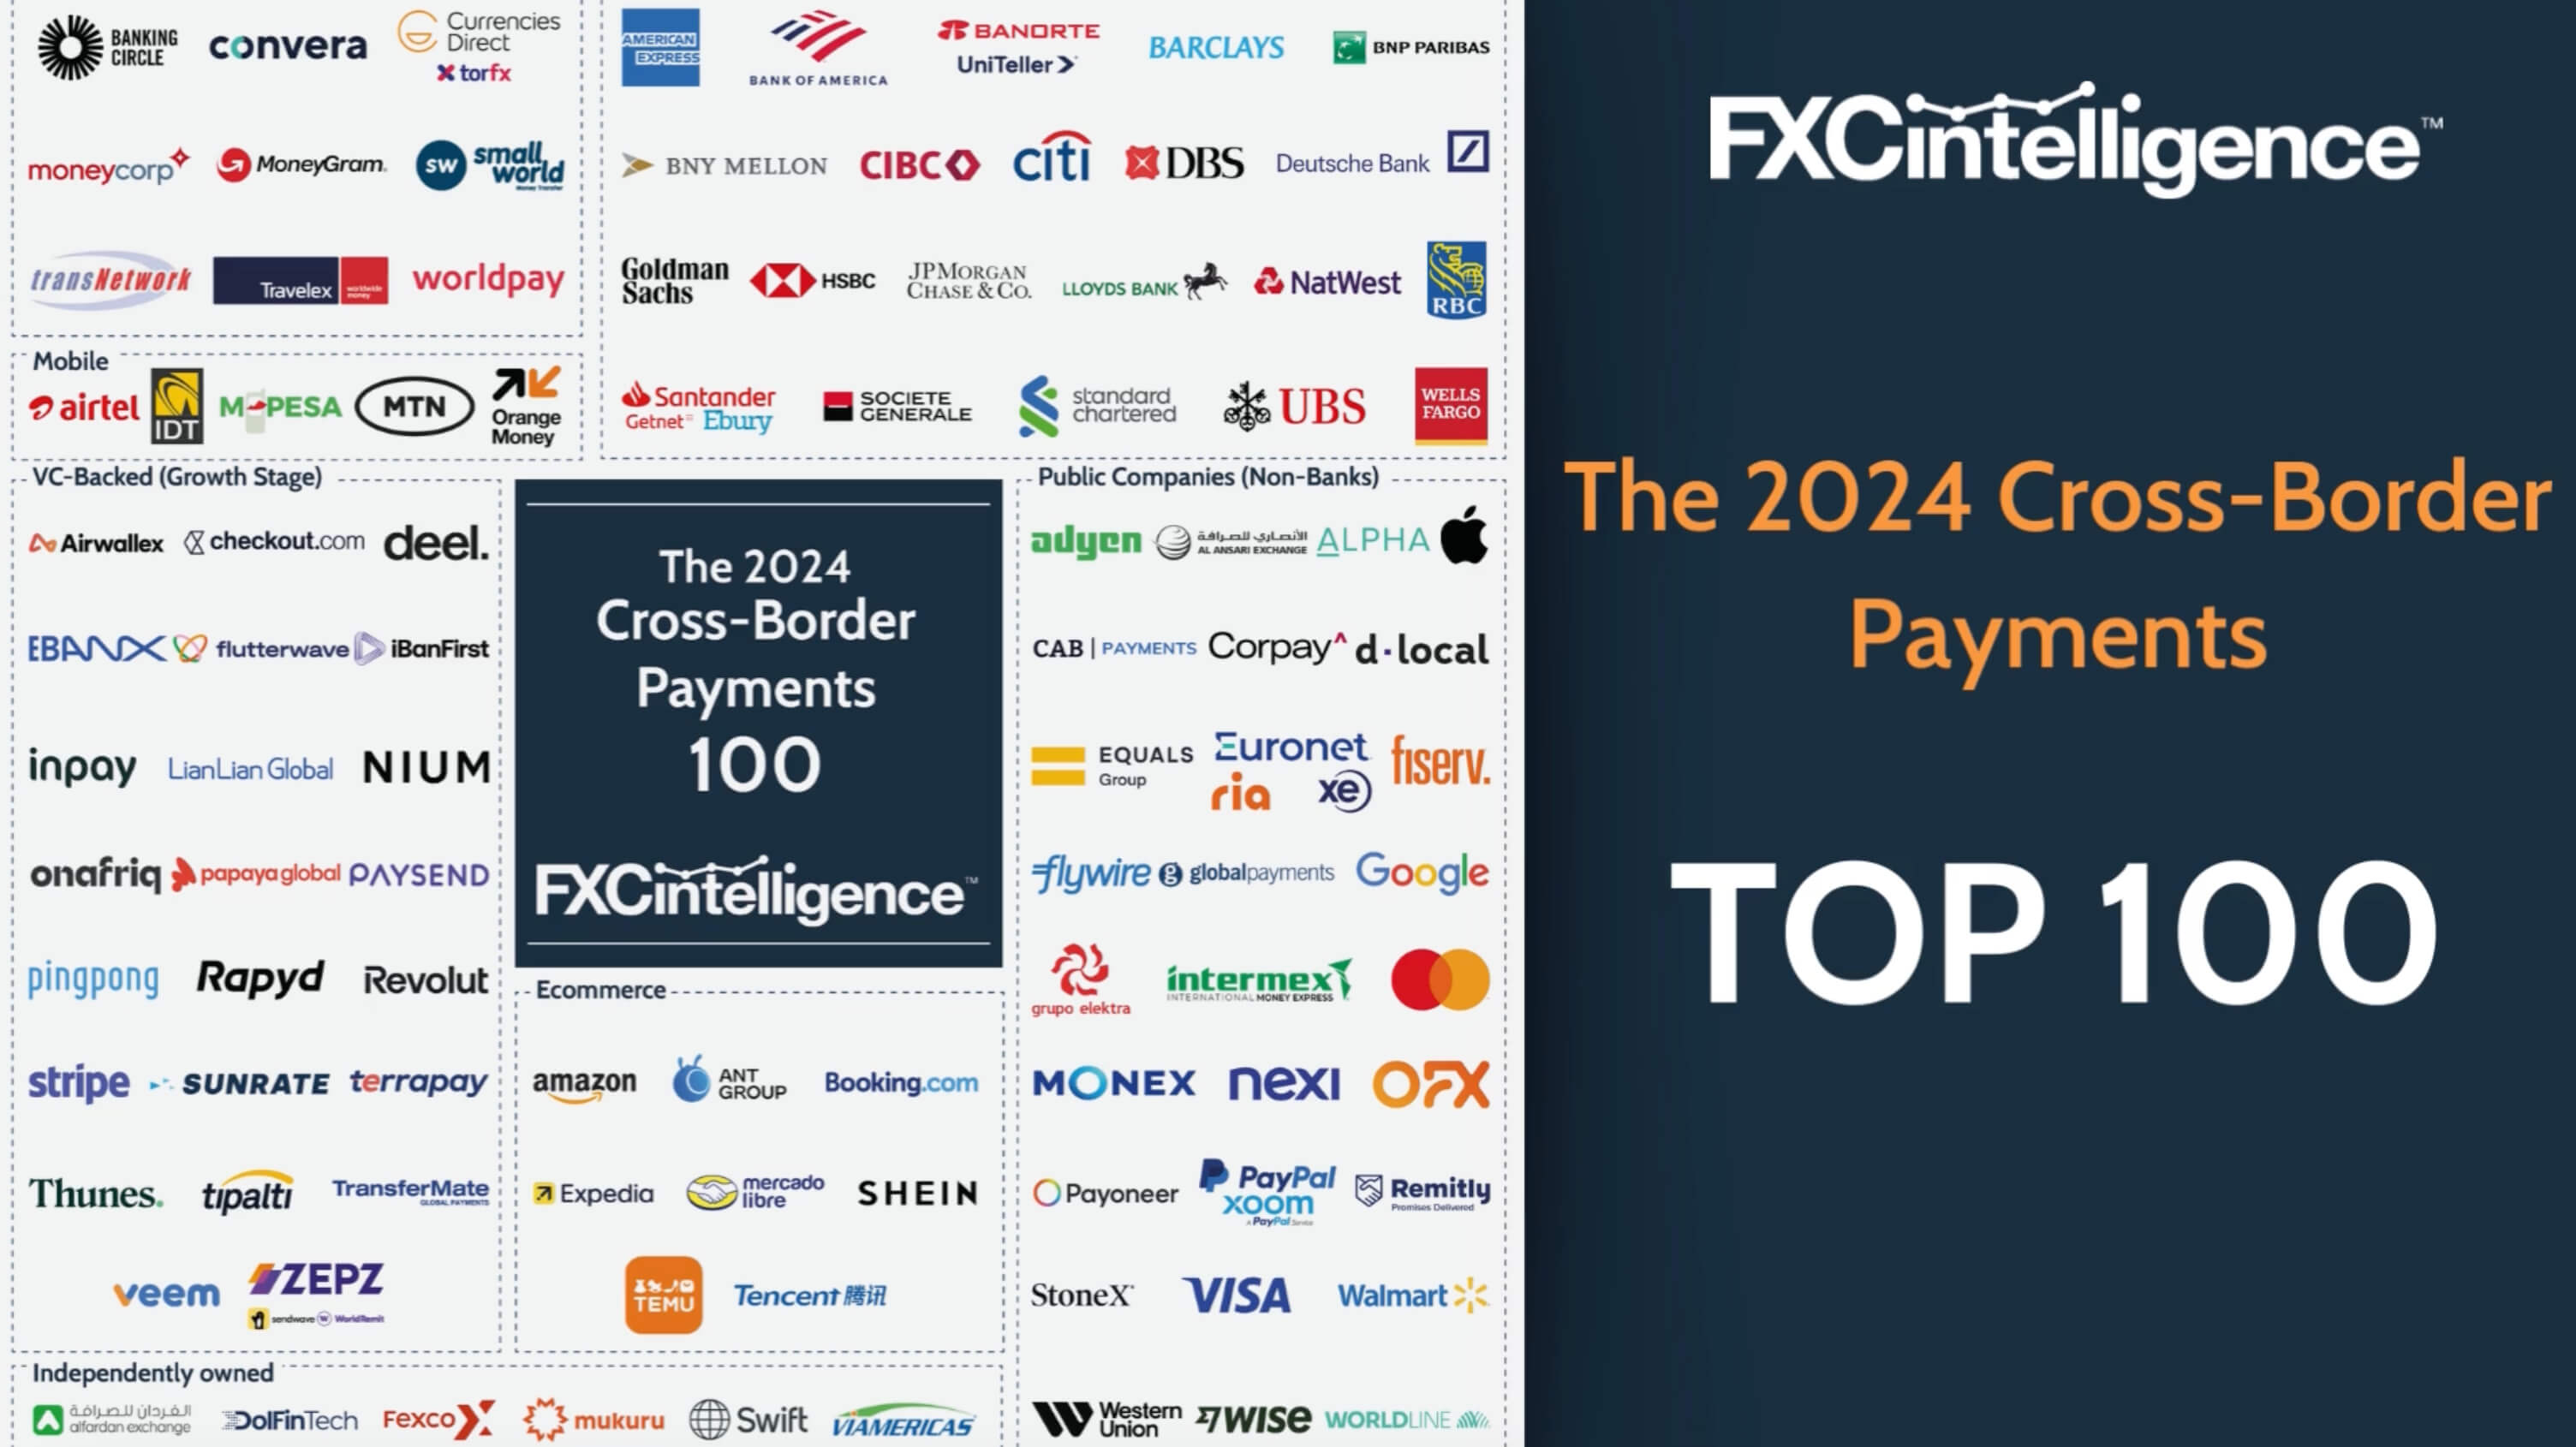 FXCintelligence top 100 cross-border payments companies